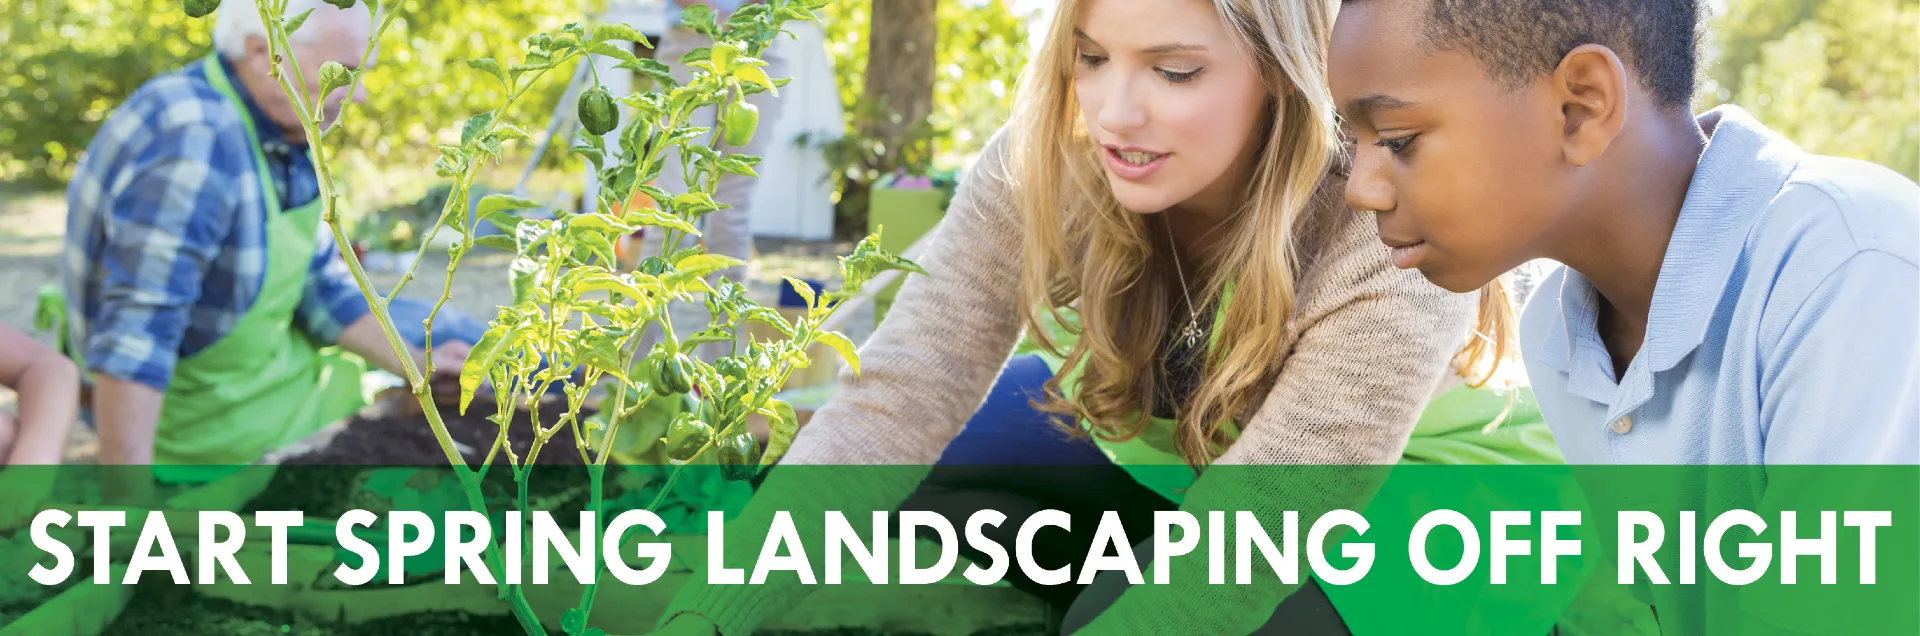 People gardening with text-Start spring landscaping off right